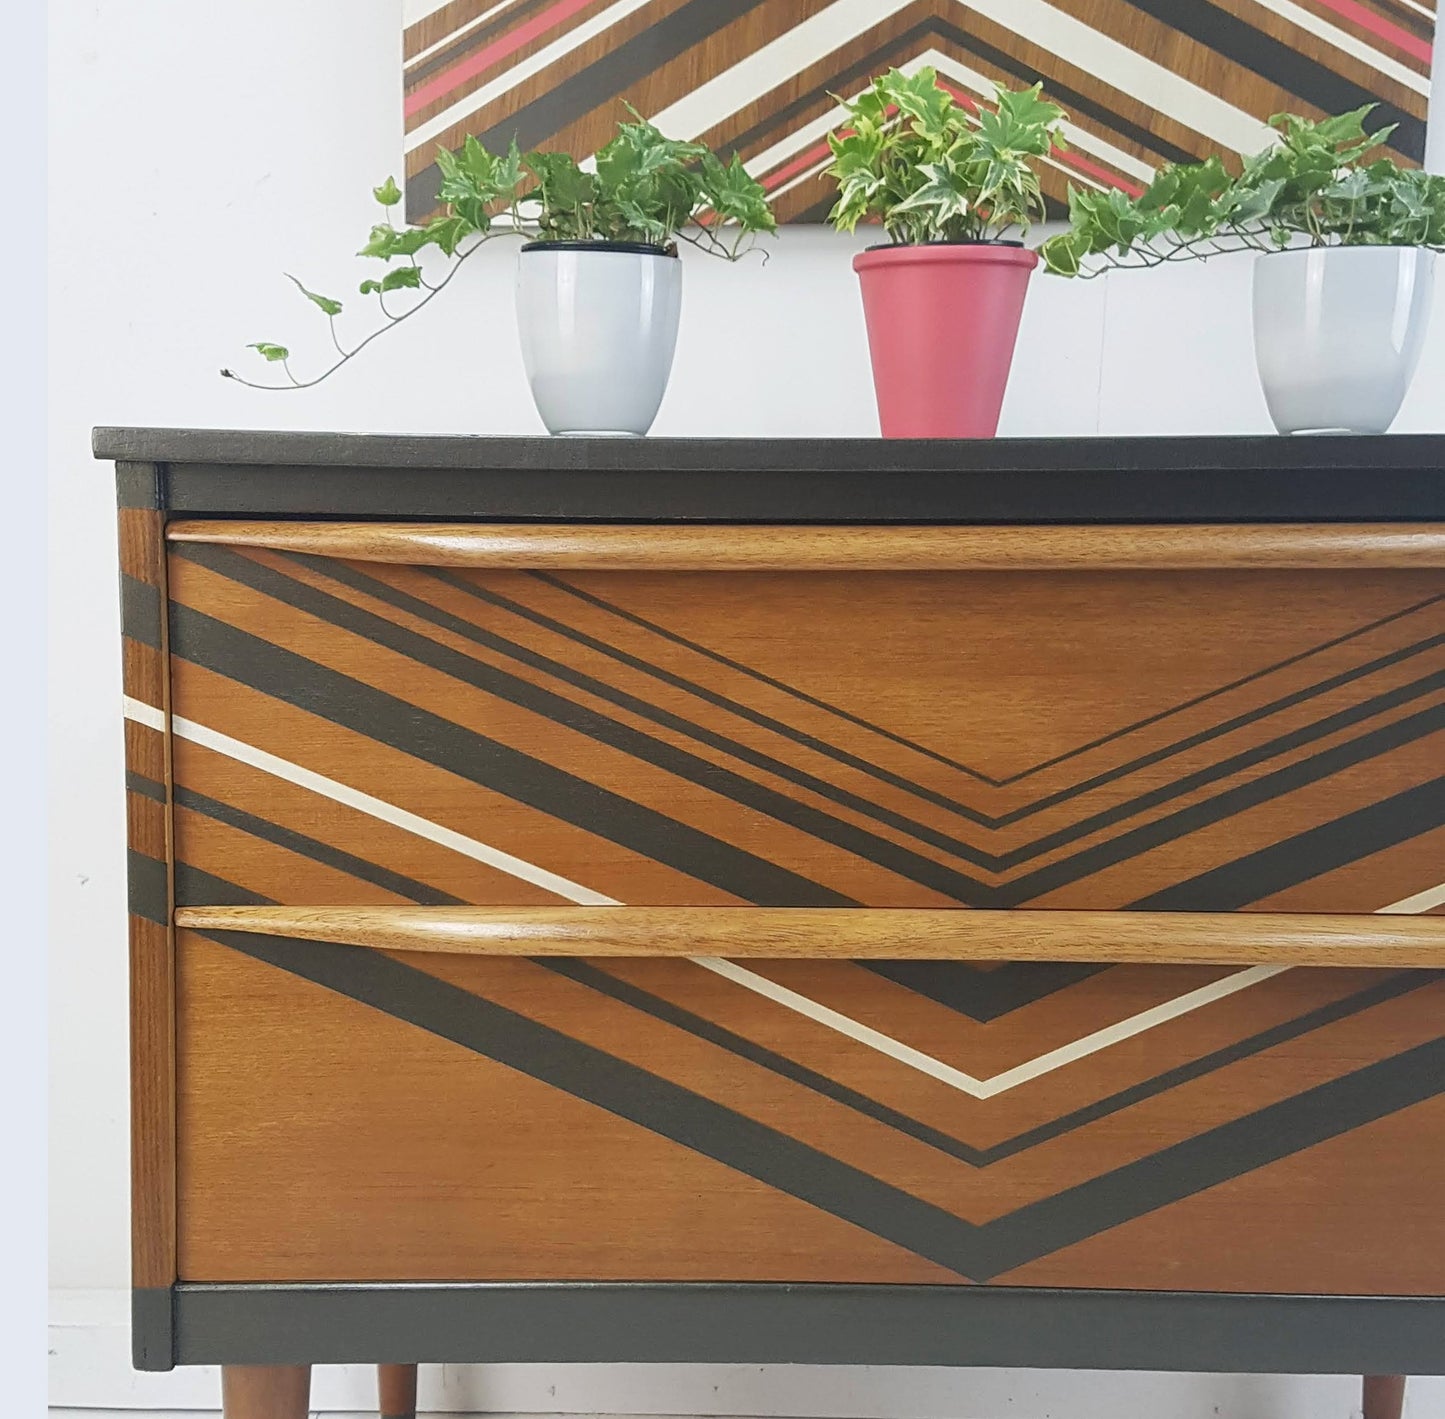 ONLINE COURSE: Cutting Edge Furniture Upcycling with Done up North